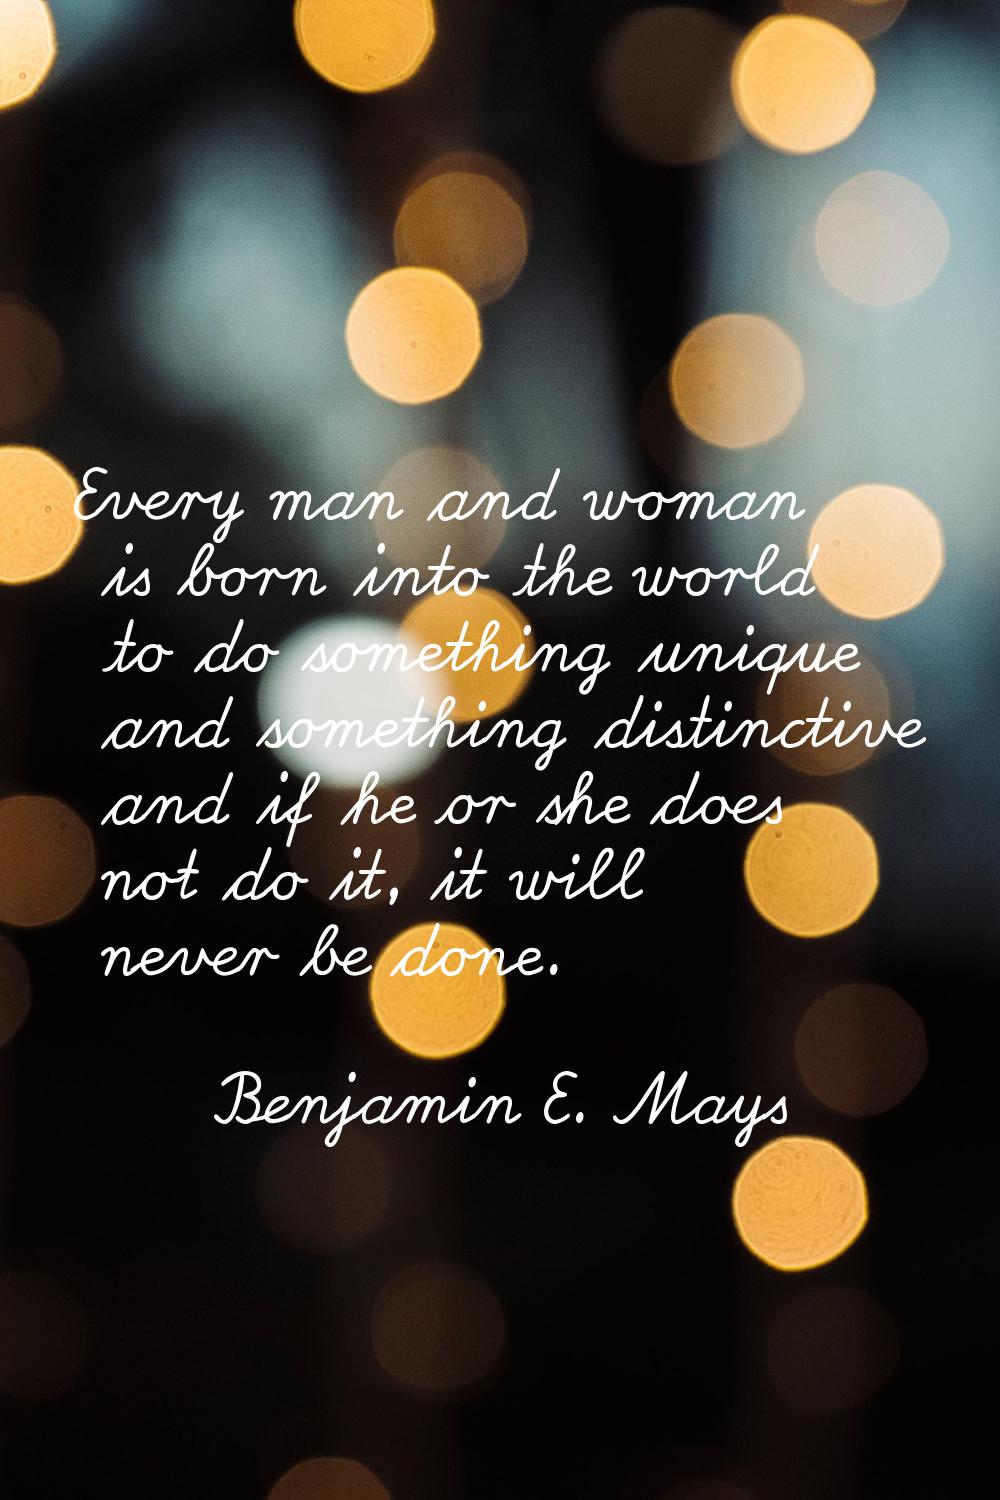 Every man and woman is born into the world to do something unique and something distinctive and if 